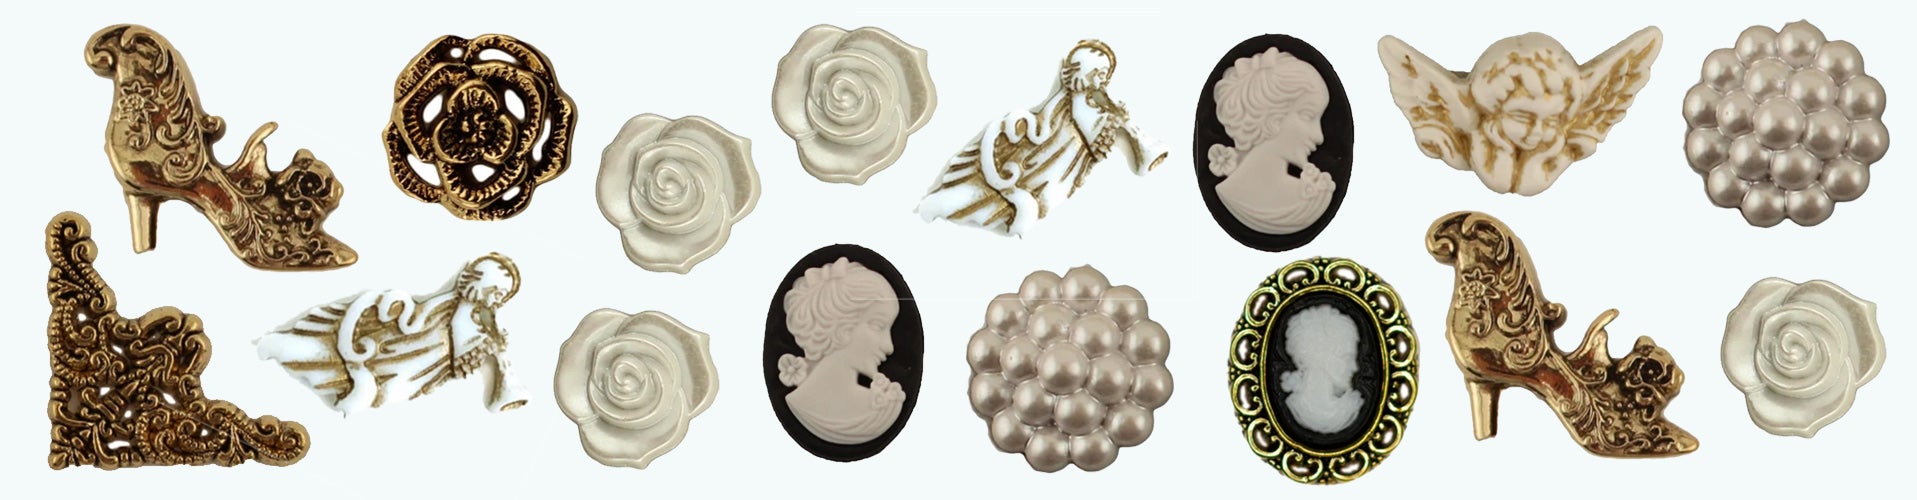 Victorian Single Bulk Buttons | Buttons Galore and More